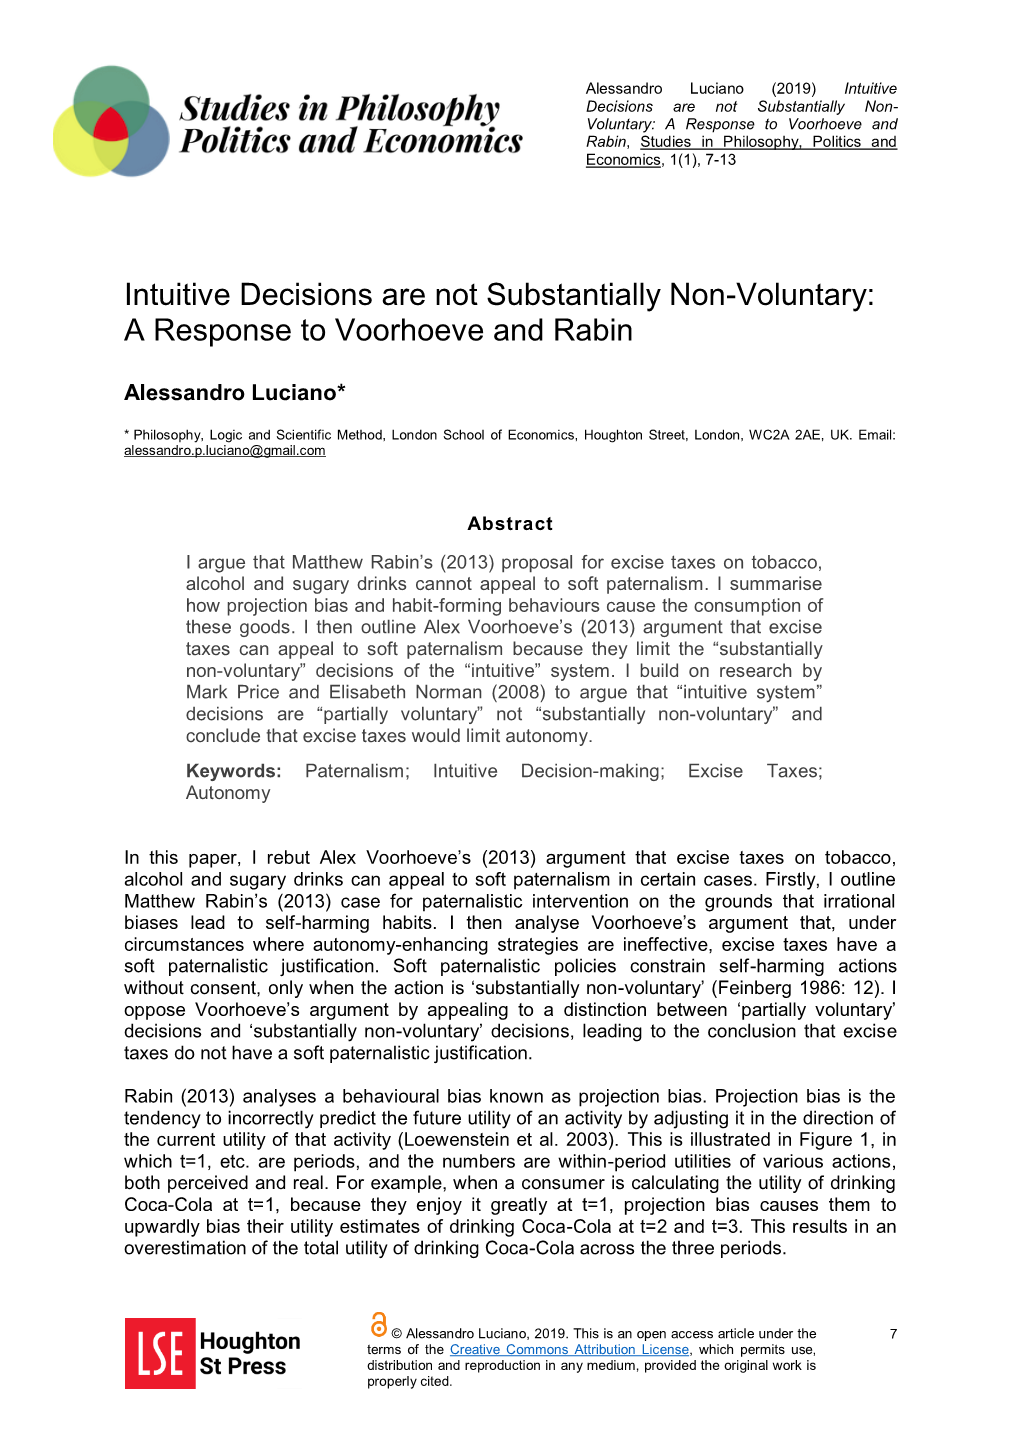 Intuitive Decisions Are Not Substantially Non-Voluntary: a Response to Voorhoeve and Rabin